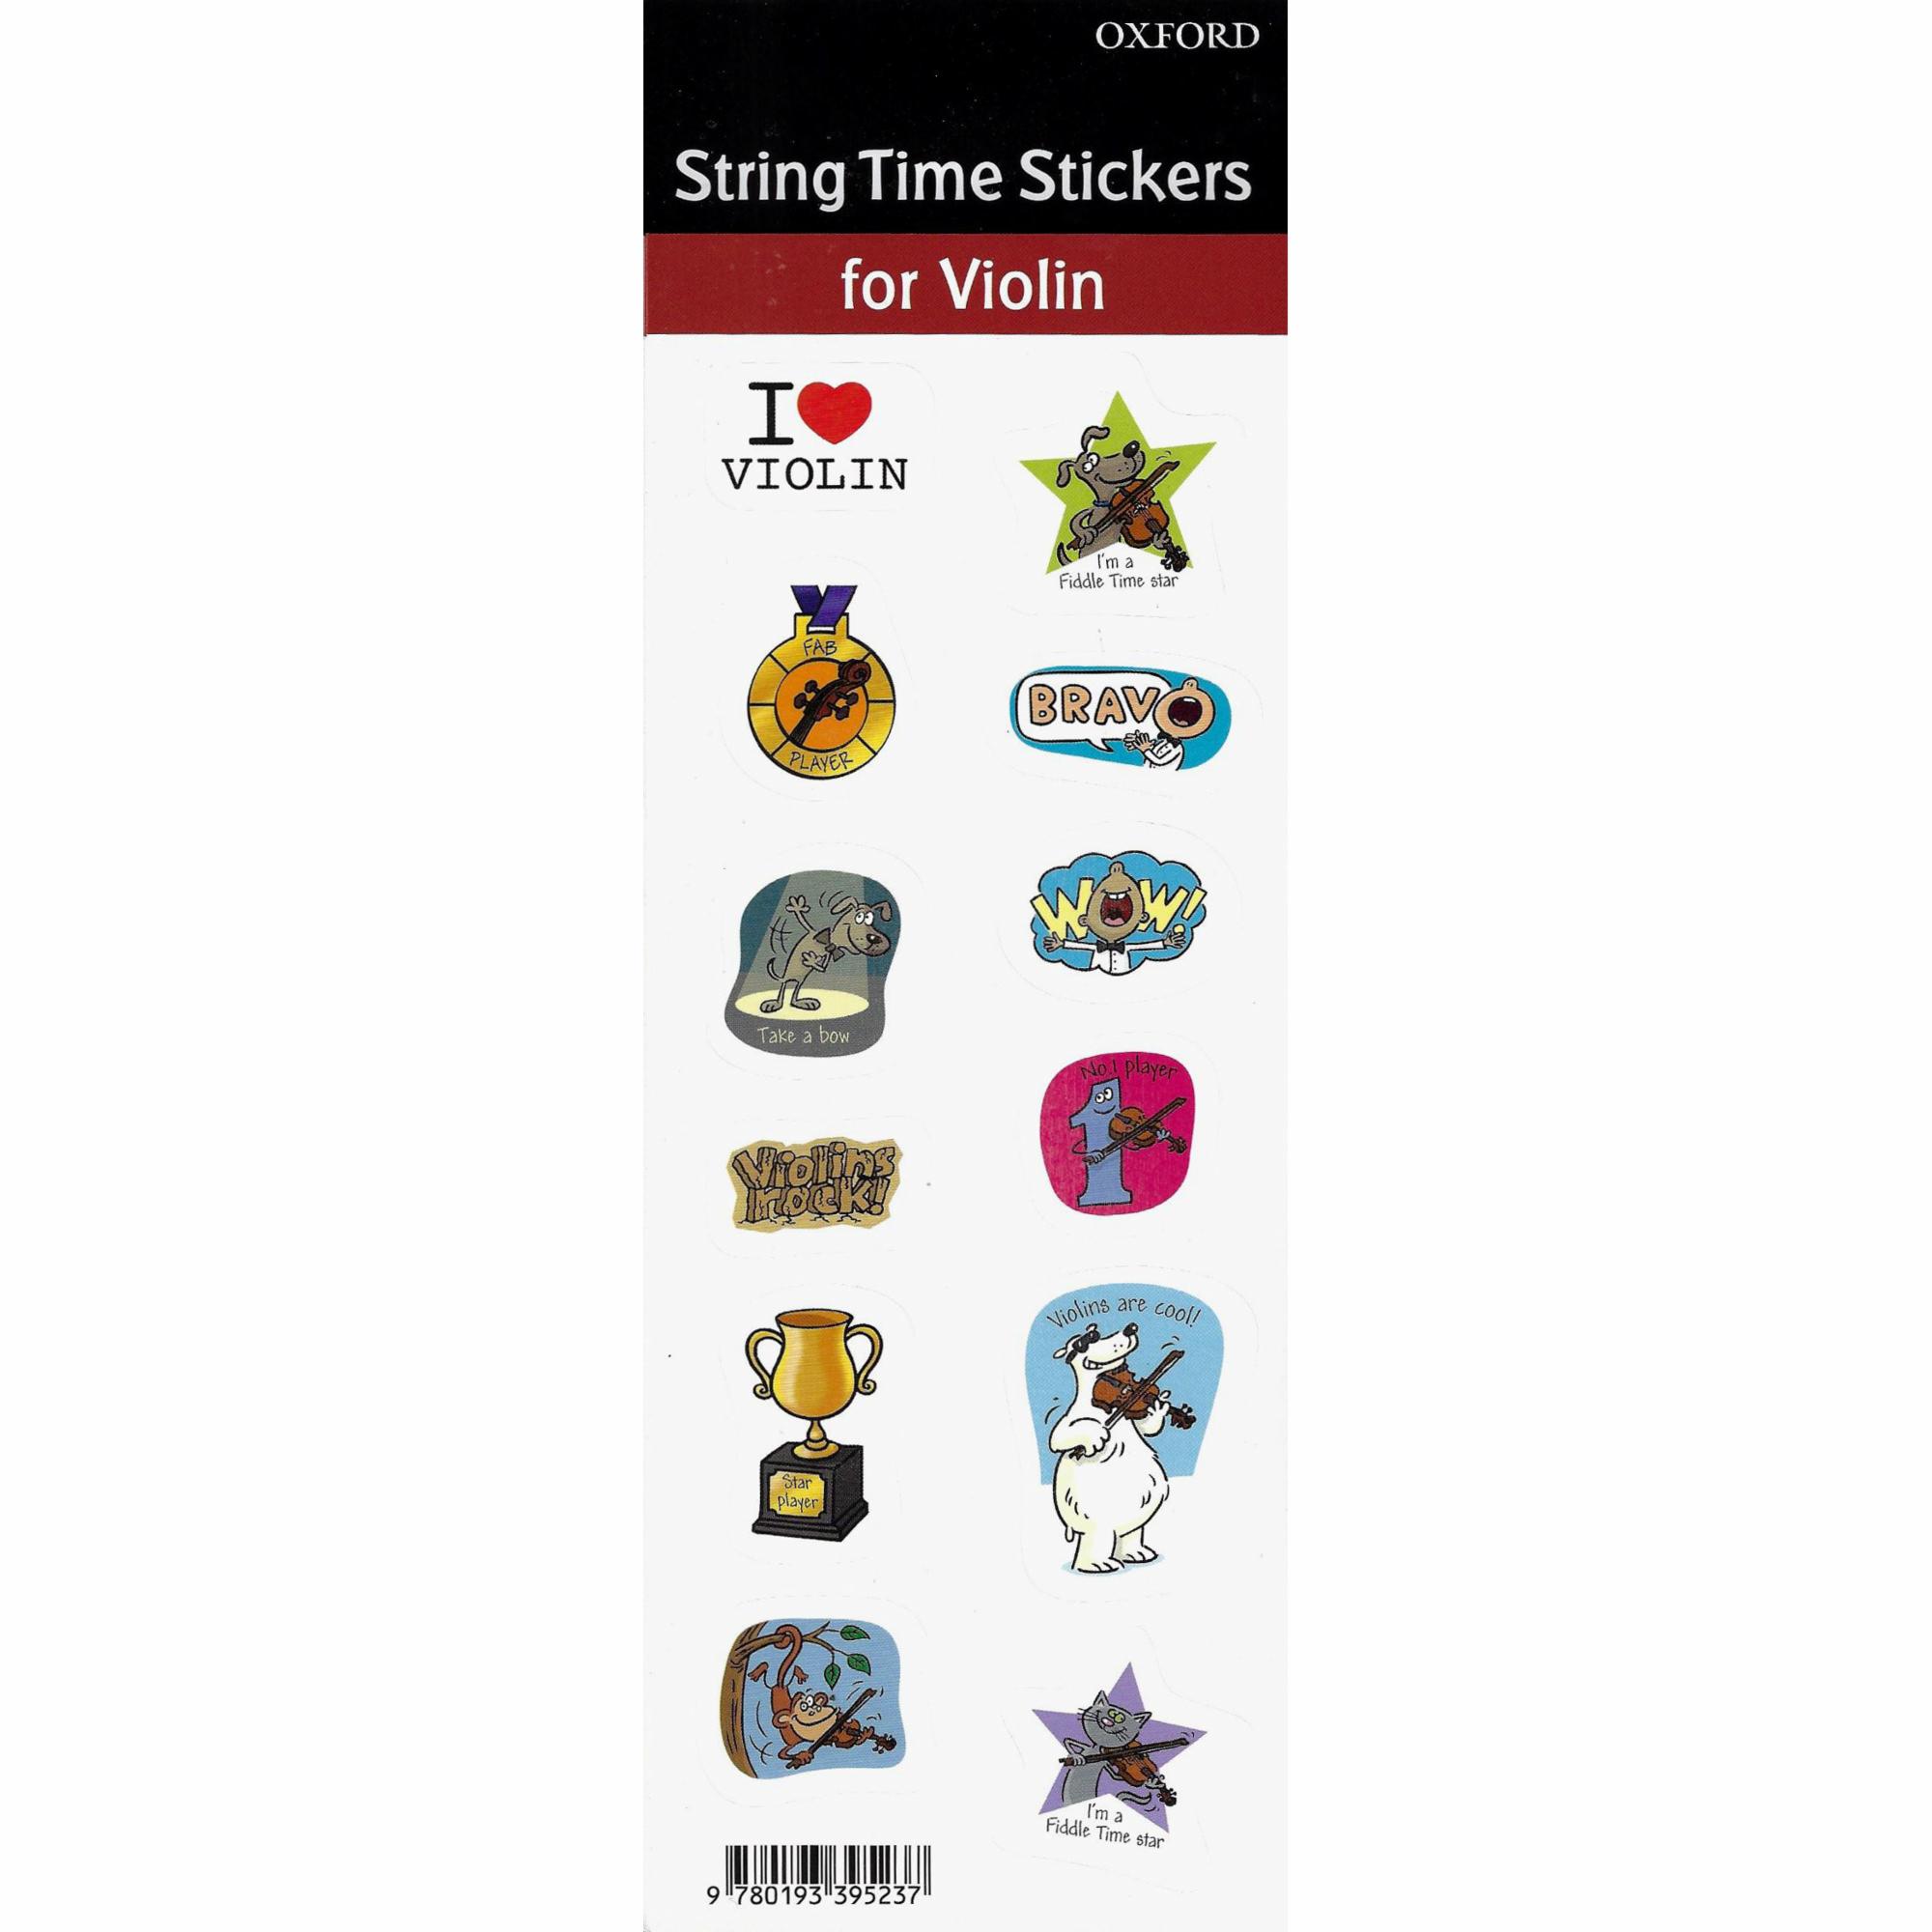 String Time Stickers